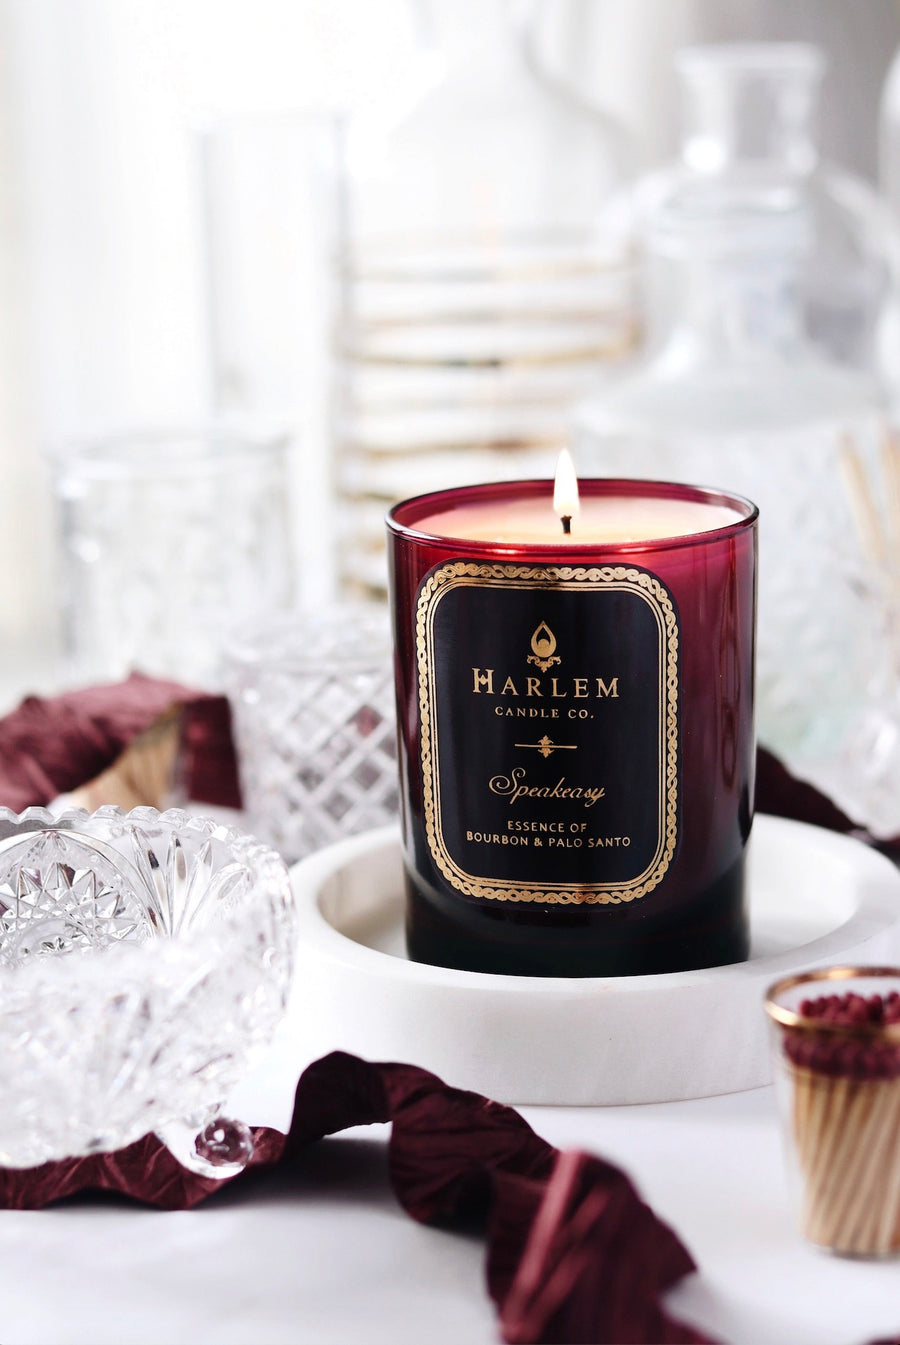 This is an image of our speakeasy candle in a lifestyle setting.